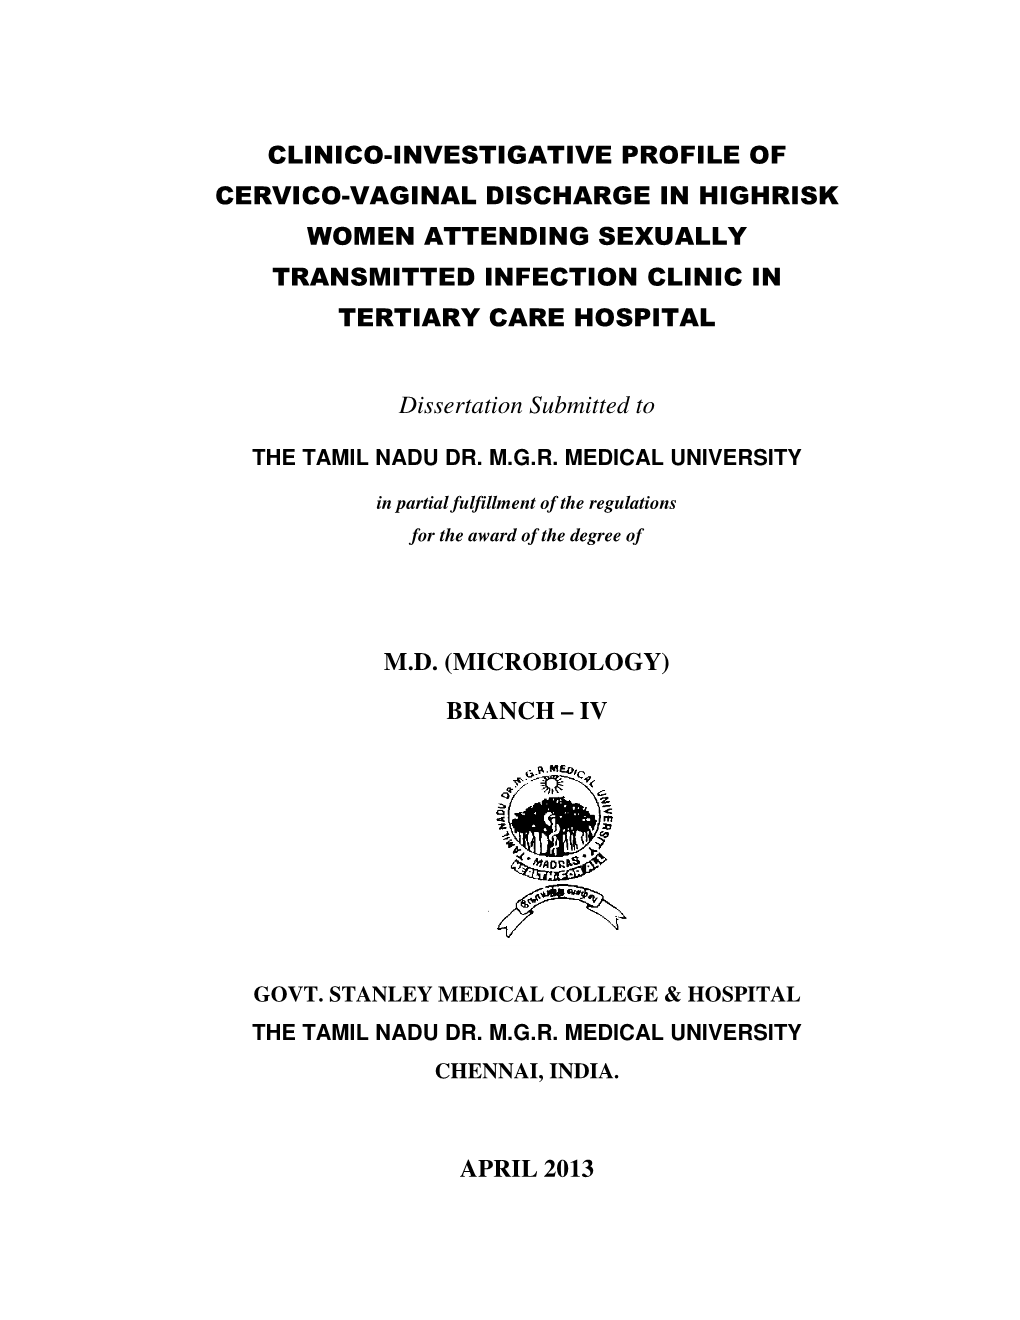 Clinico-Investigative Profile of Cervico-Vaginal Discharge in Highrisk W Om En Attending Sexually Transm Itted Infection Clinic in Tertiary Care Hospital